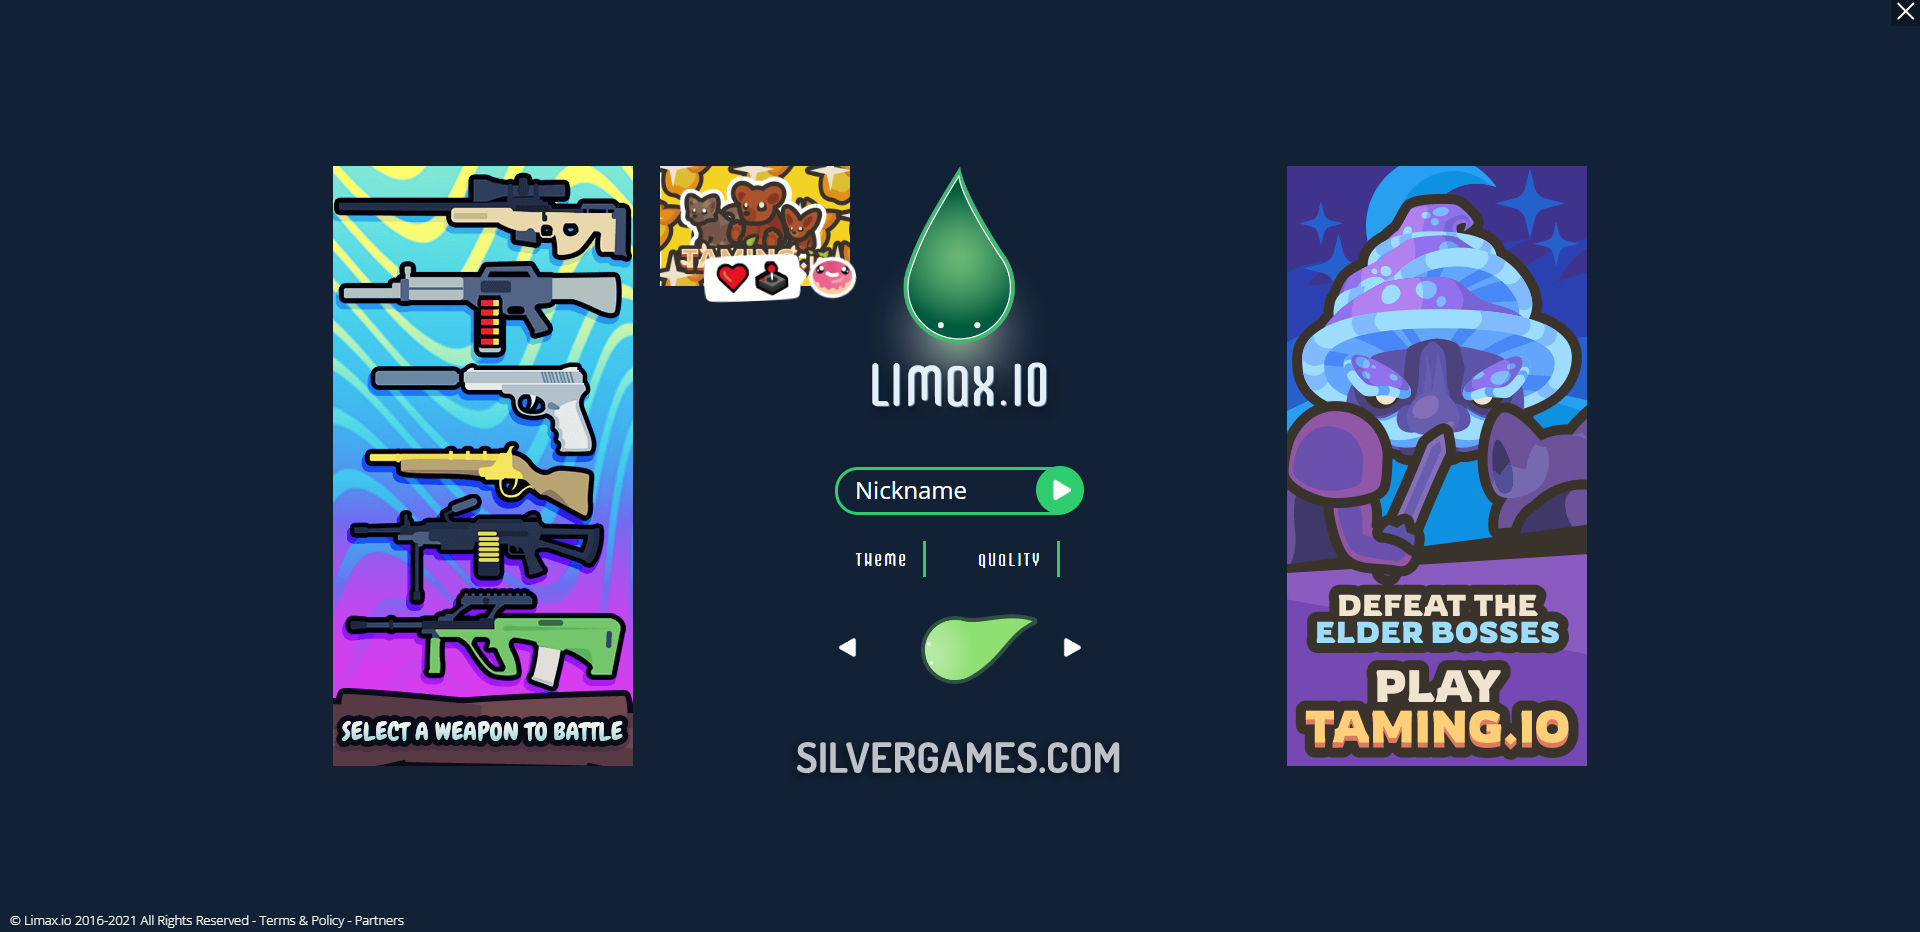 Taming.io - Play Online on SilverGames 🕹